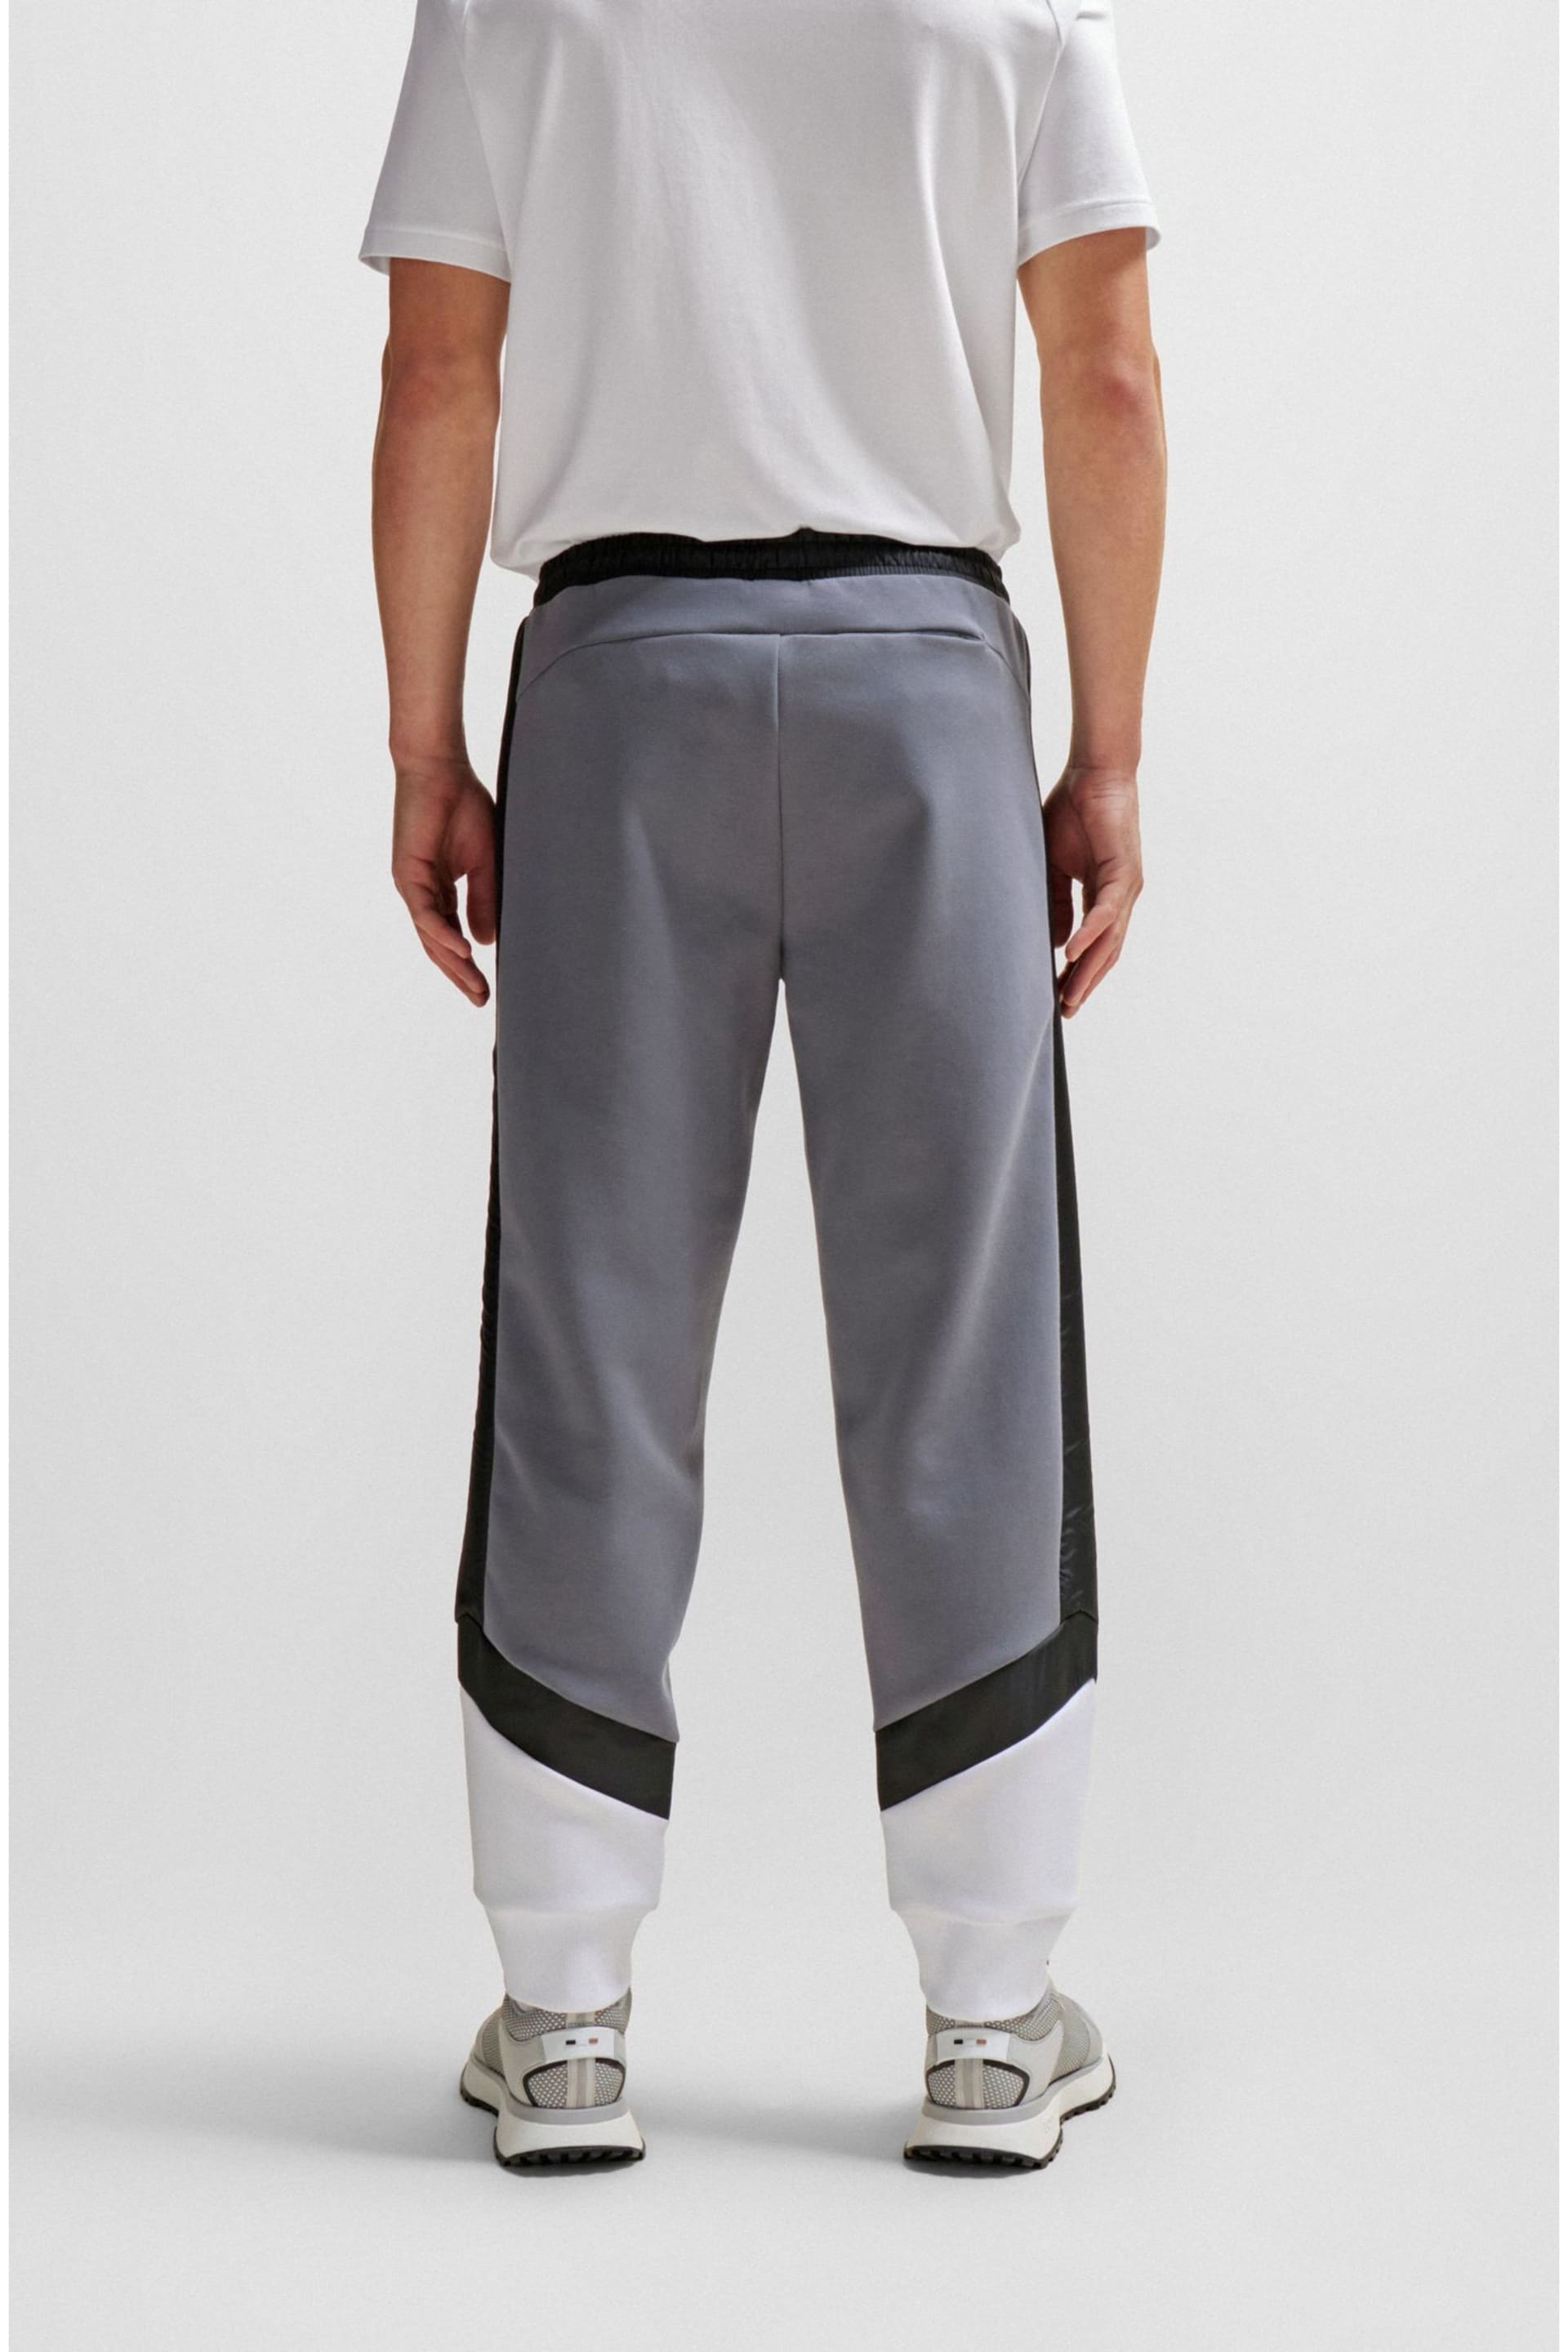 BOSS Grey Relaxed Fit Contrast Panel Sporty Joggers - Image 3 of 7